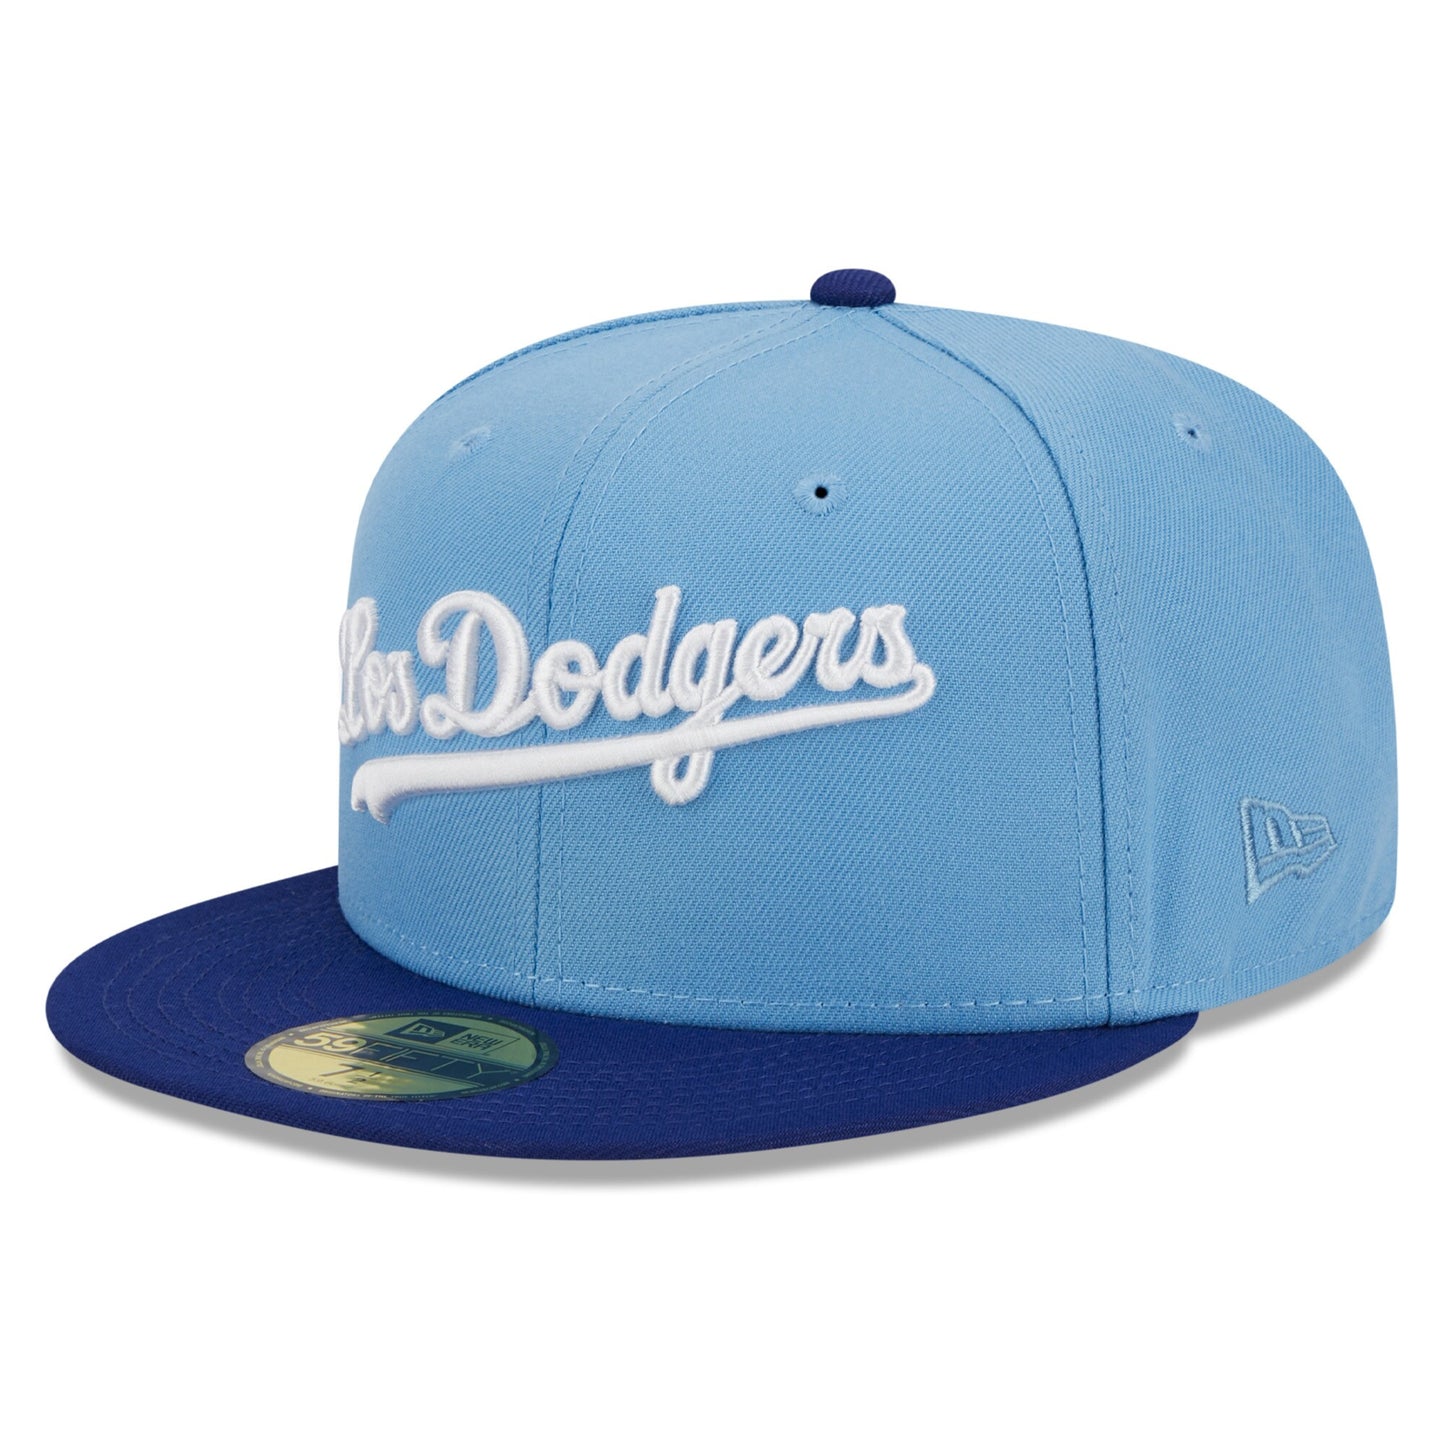 Los Angeles Dodgers New Era Cooperstown Collection Retro City 59FIFTY Fitted Hat - Light Blue